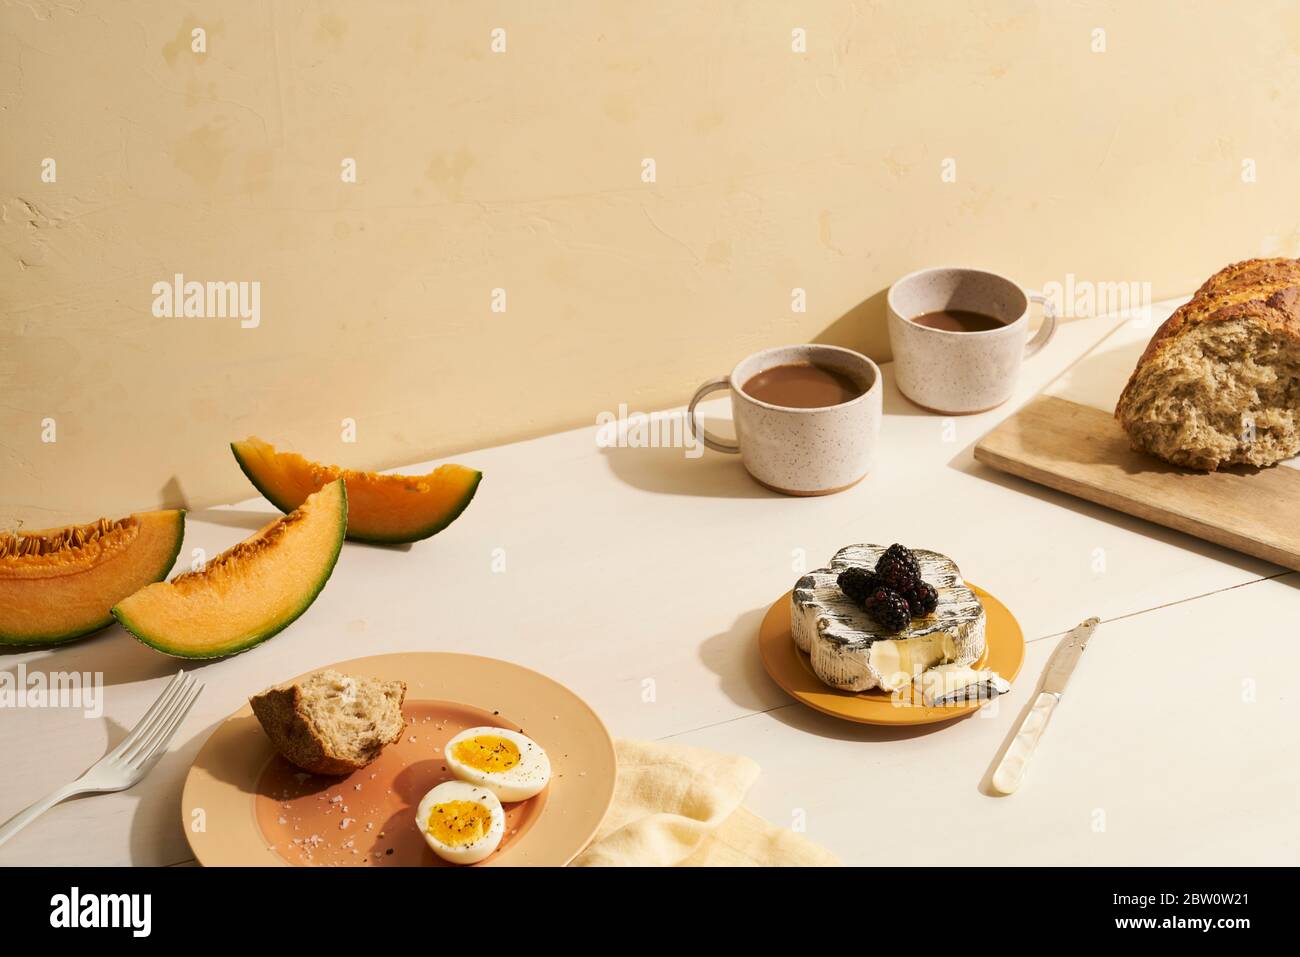 European style brunch or breakfast spread with cheese fruit and bread Stock Photo